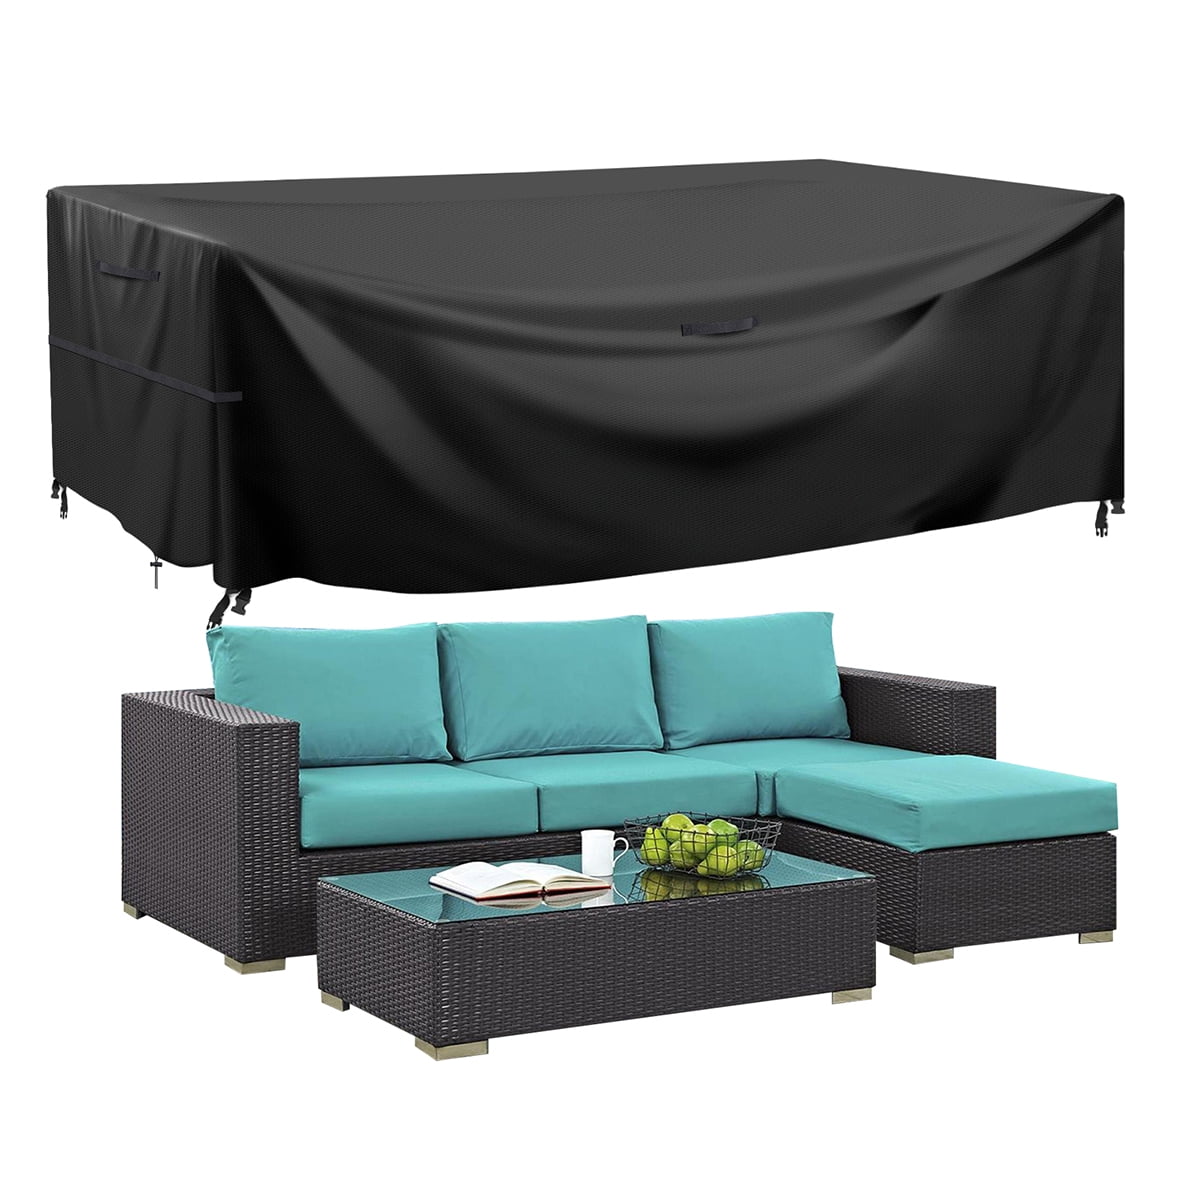 Patio Furniture Sofa Loveseat Cover Waterproof Outdoor Protection 